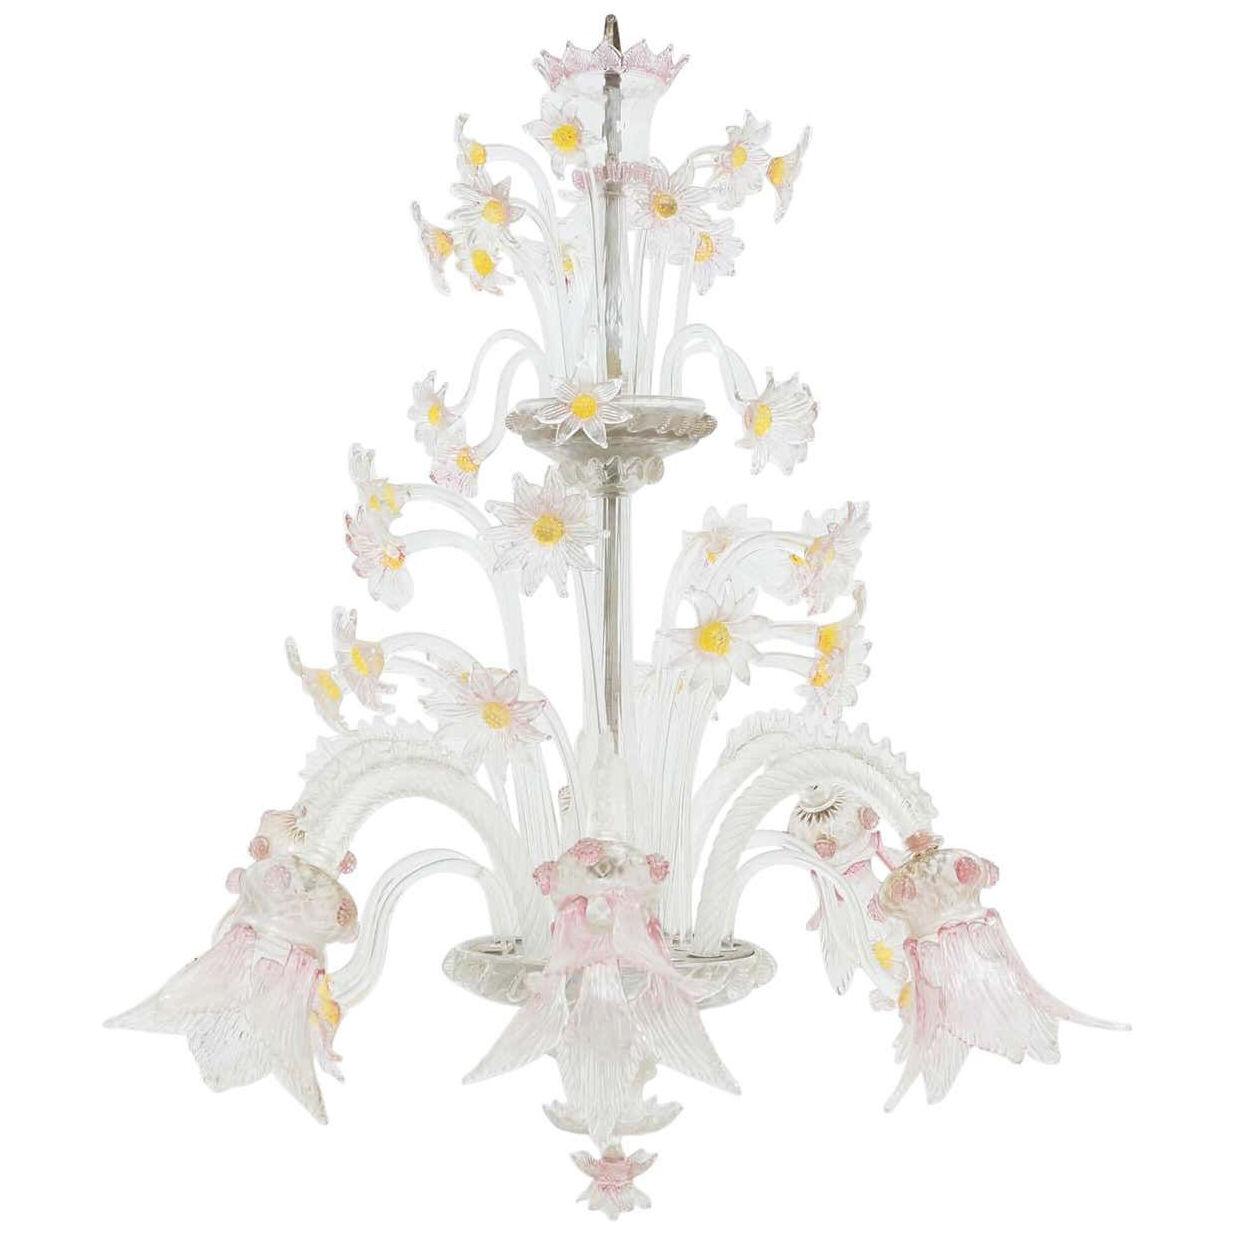 Early 20th Century Venice Murano Glass Floral Ceiling Lamp